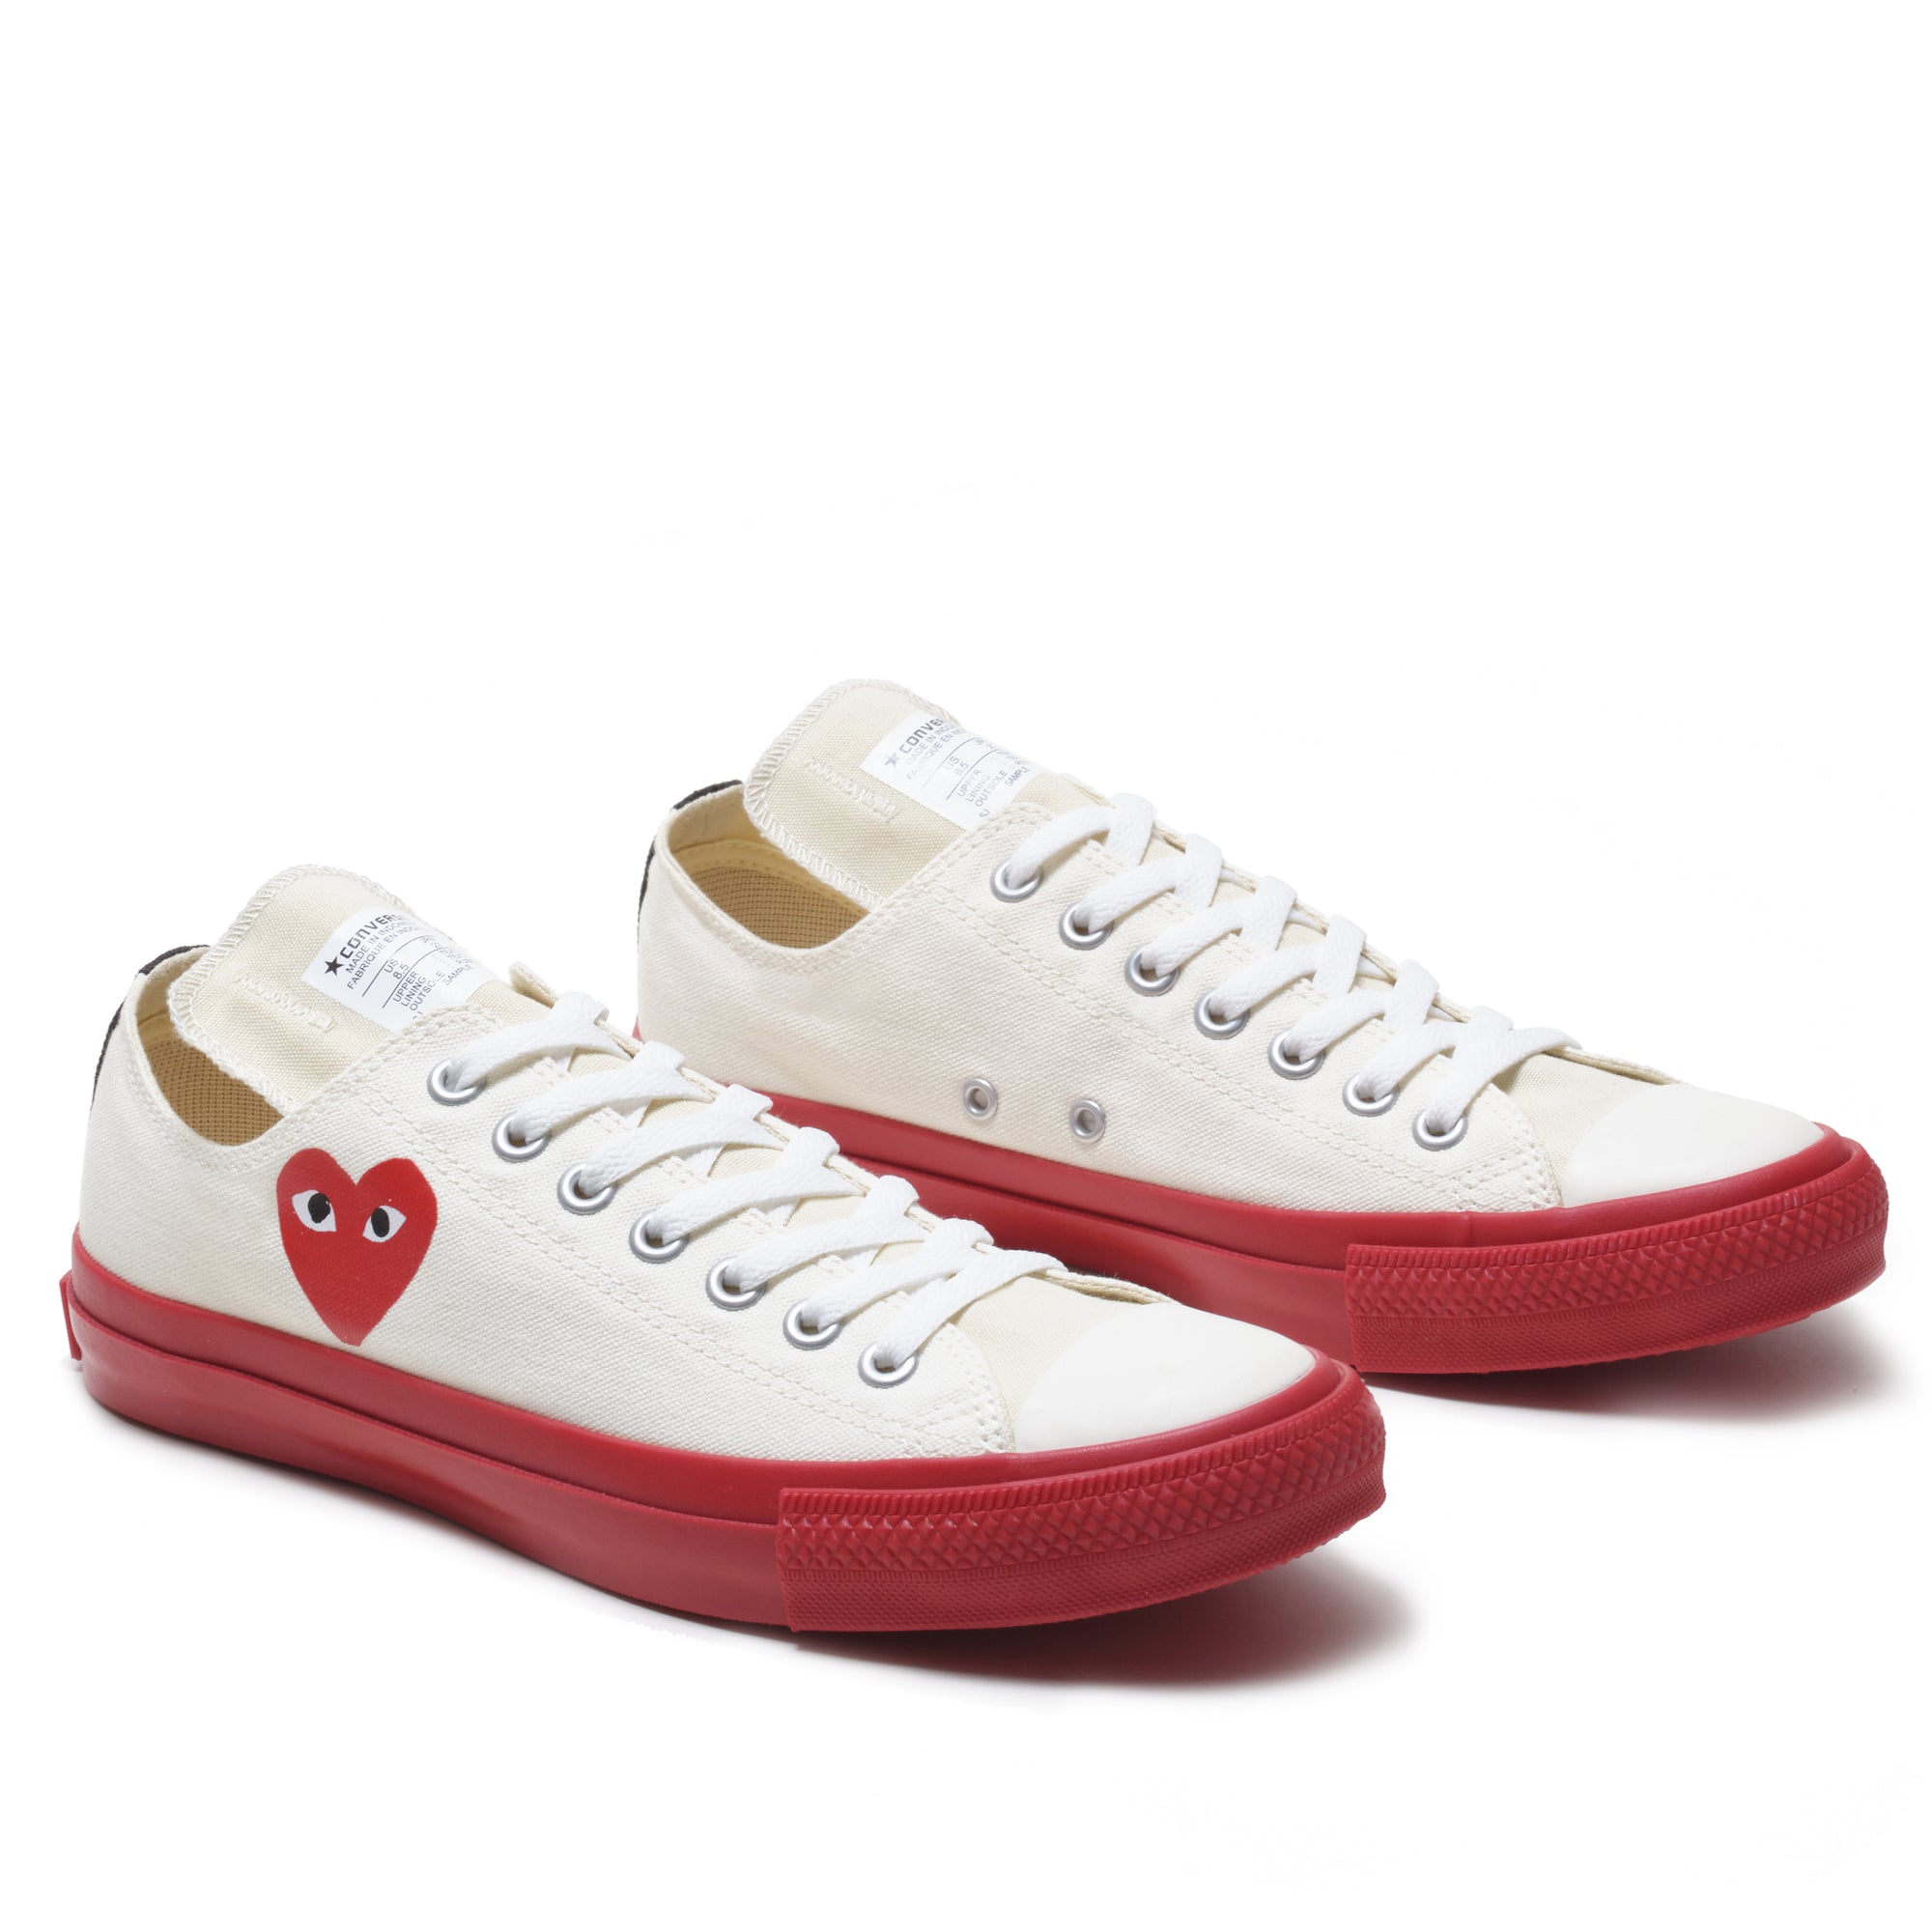 PLAY CDG CONVERSE - Chuck Taylor Low - (White) view 3